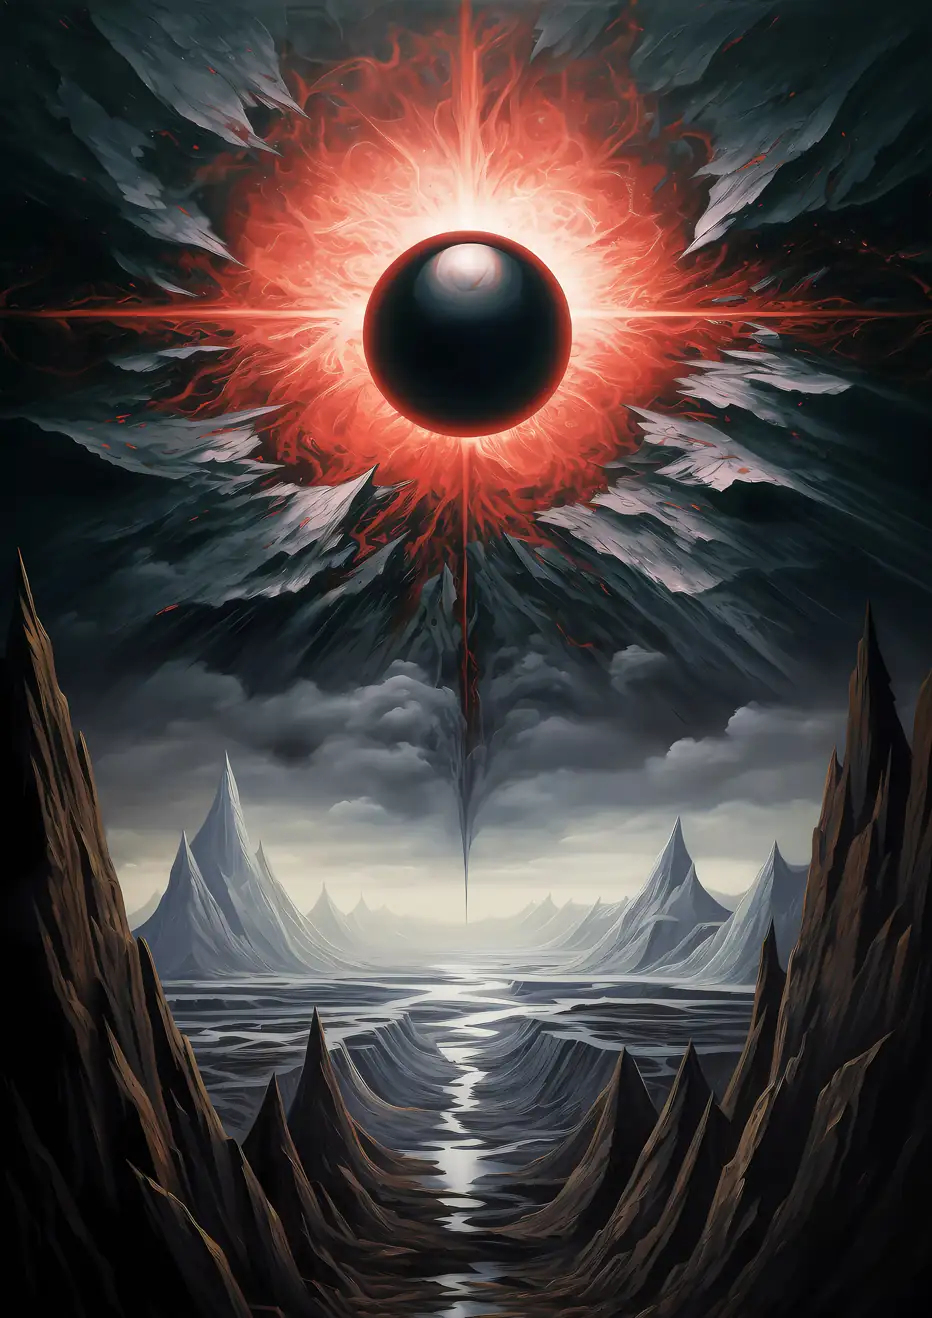 "Eclipse of the World" - A desolate wasteland with towering mountains and a mysterious black orb.